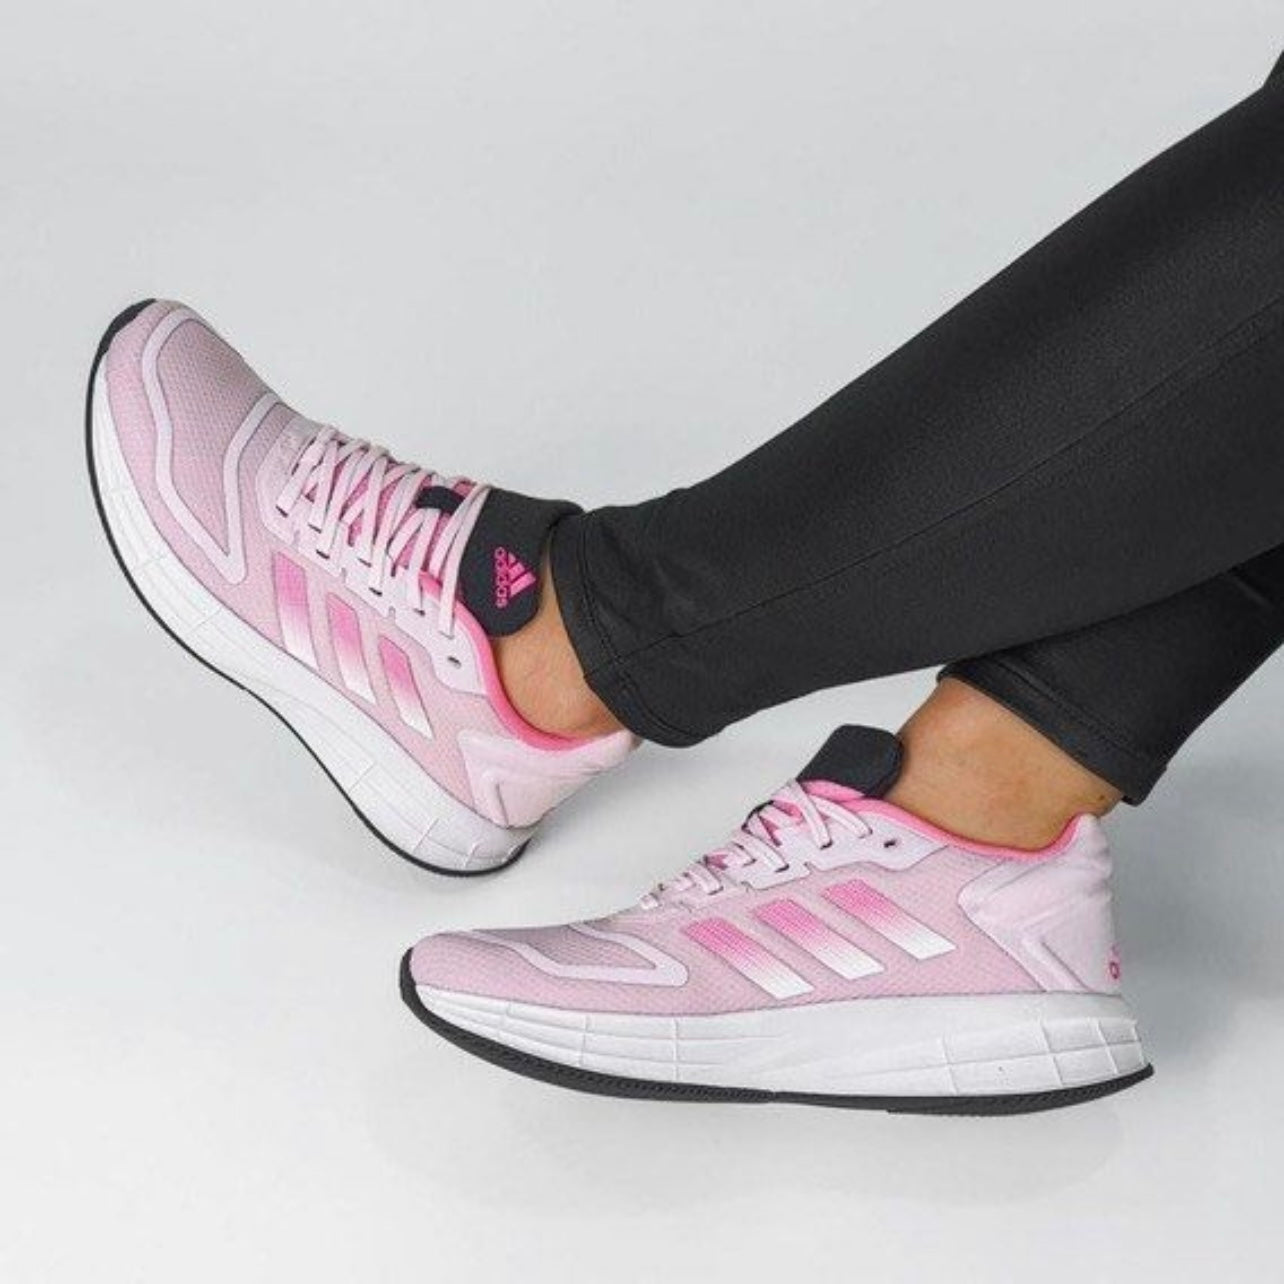 Adidas running for woman in pink